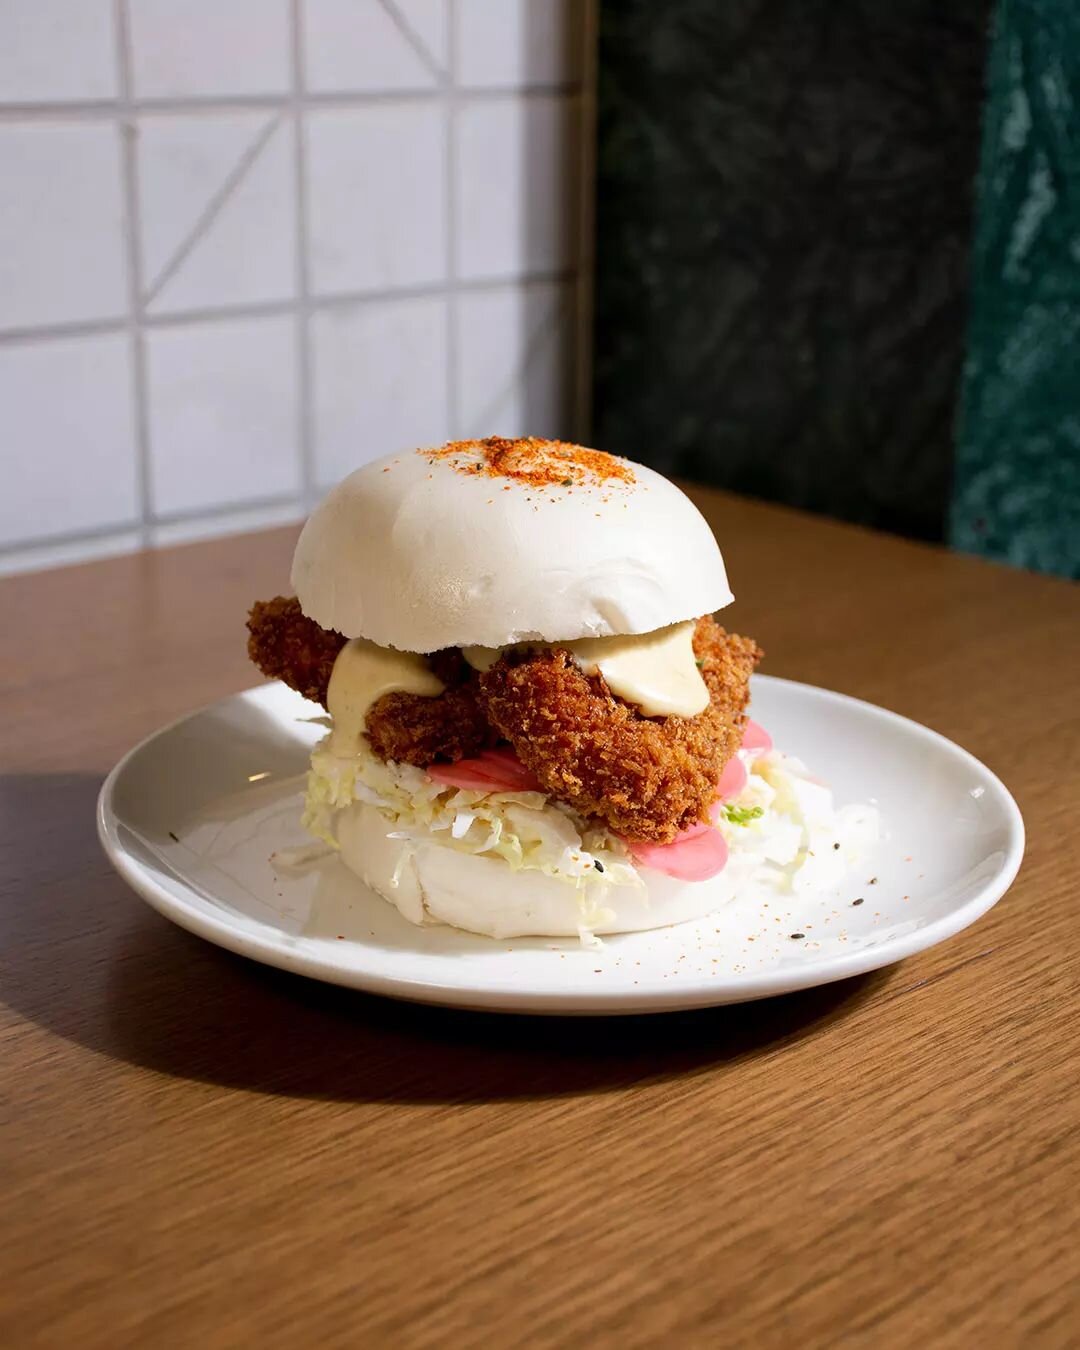 Looks too good to eat, but don't let that stop you - yummy crumbed chicken Katsu Bao-ger&nbsp;🤤&nbsp;#lunchgoals